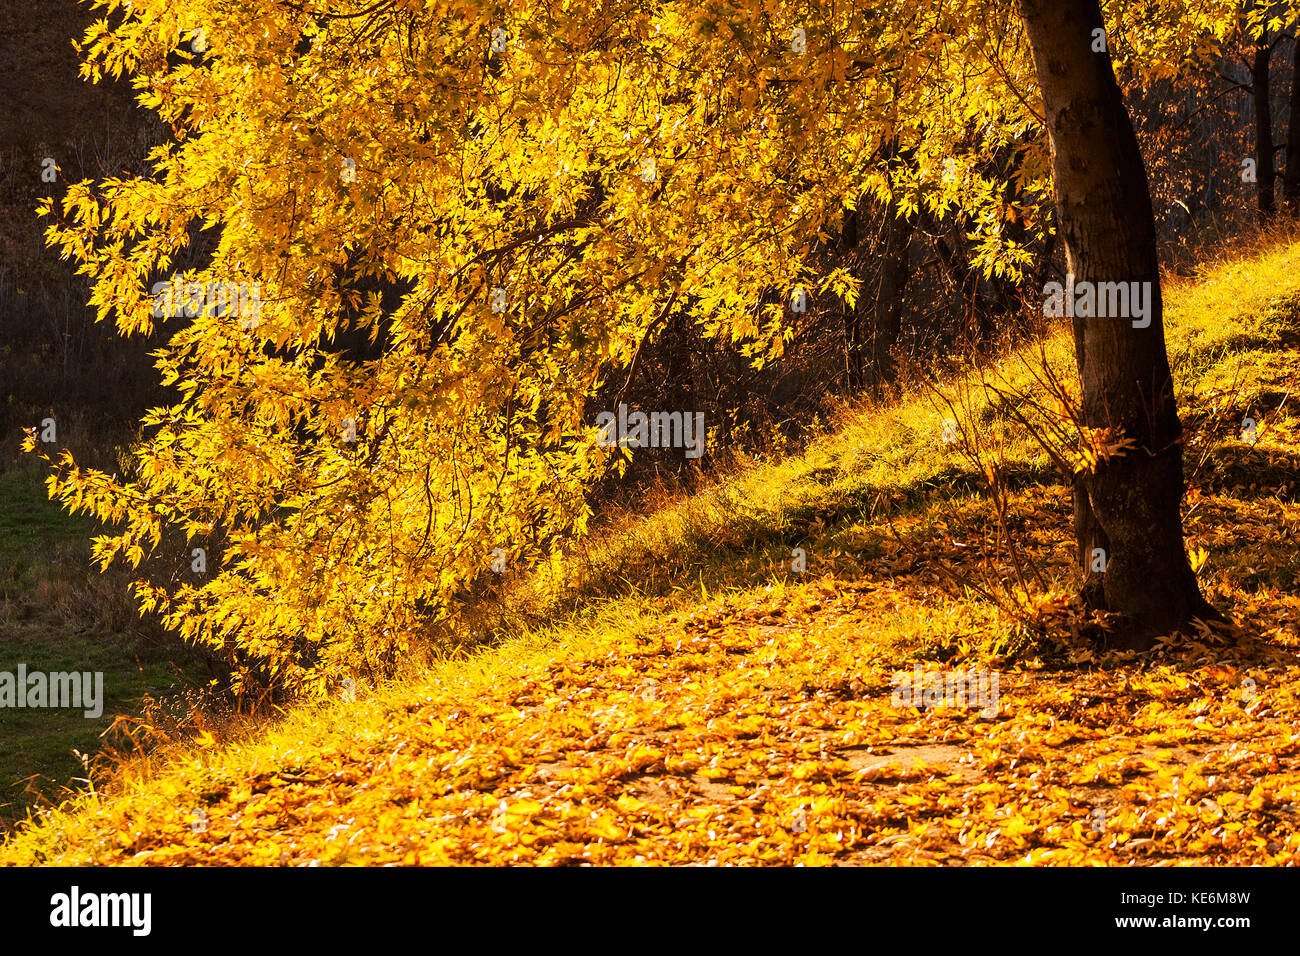 Maple  tree in a park by an autumn day with yellow, green and red leaves and grass around covered by foliage. Stock Photo